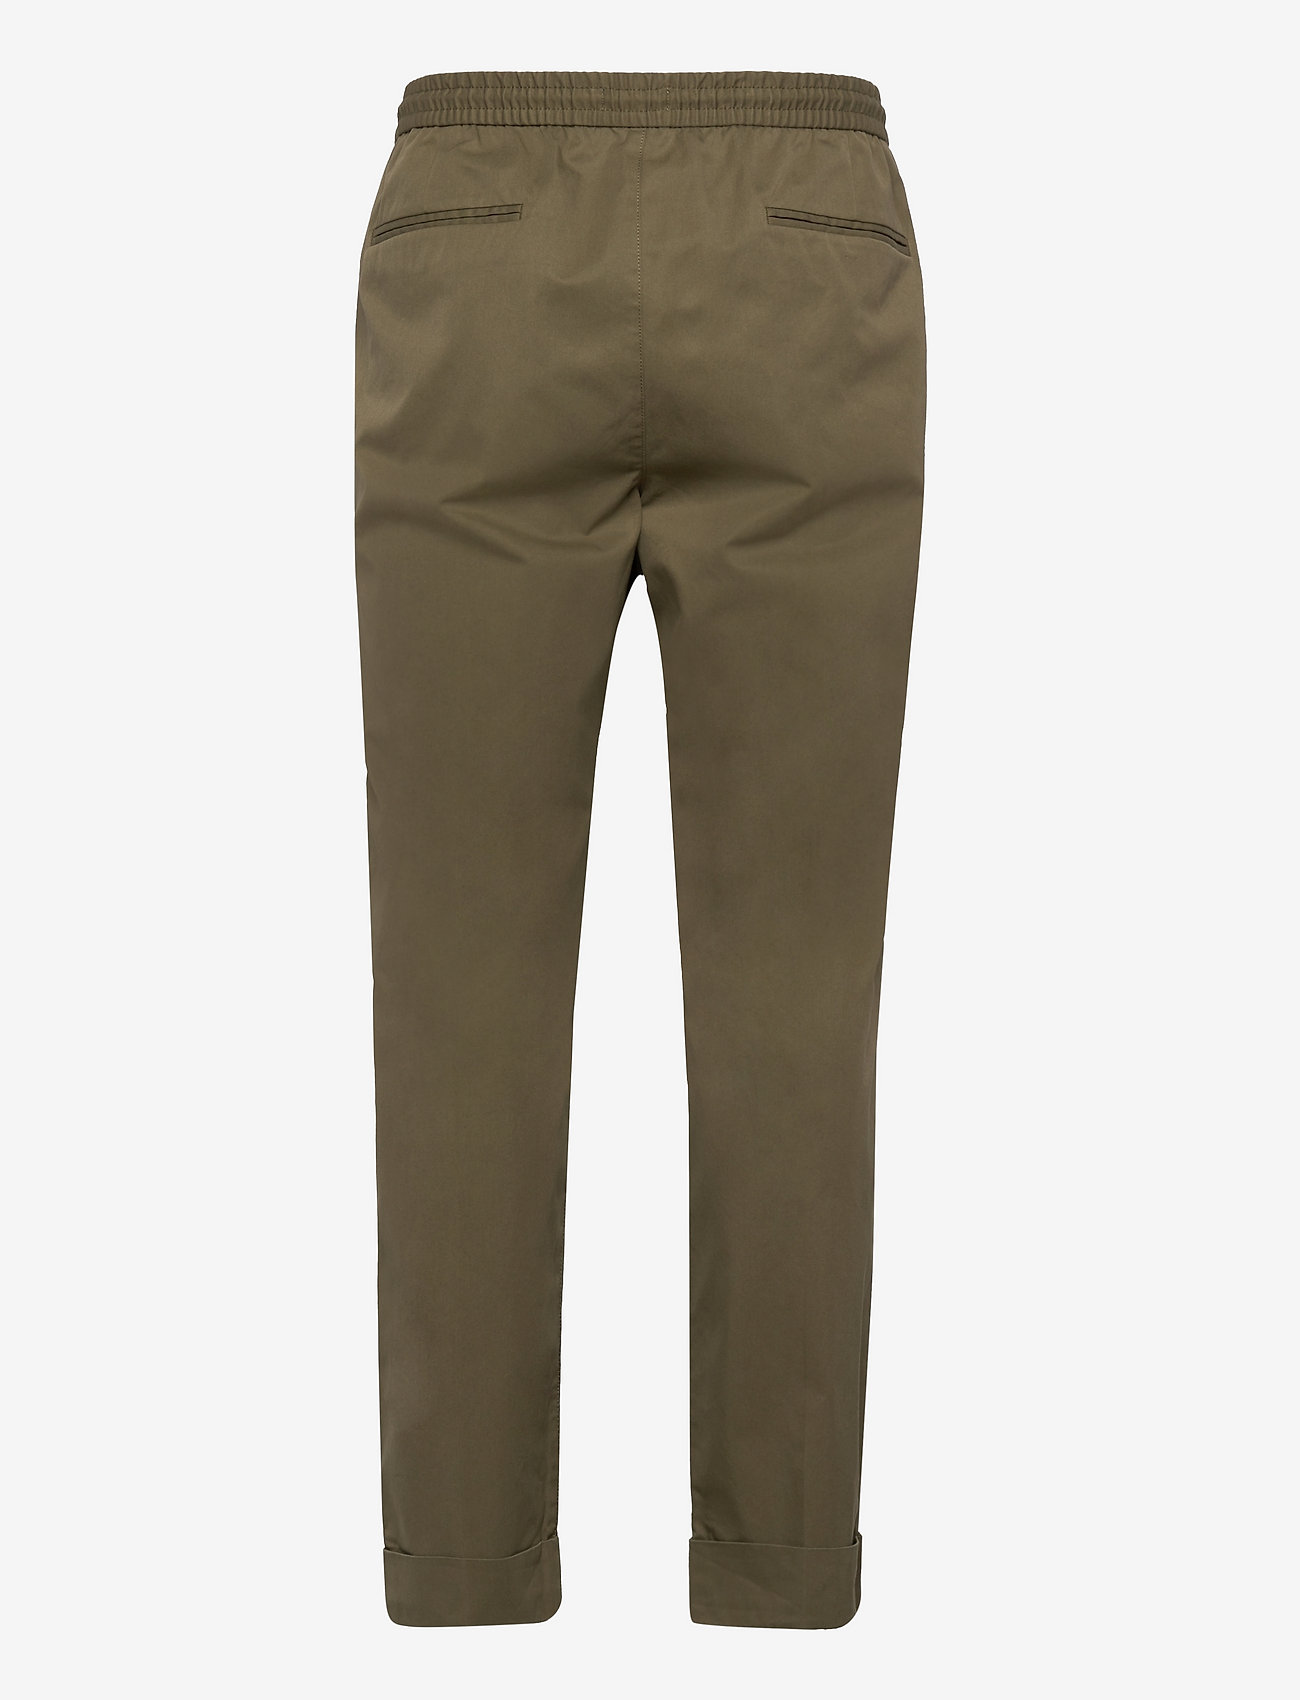 Esprit Collection - Chinos with an elasticated waistband made of blended organic - vabaajapüksid - light khaki - 1